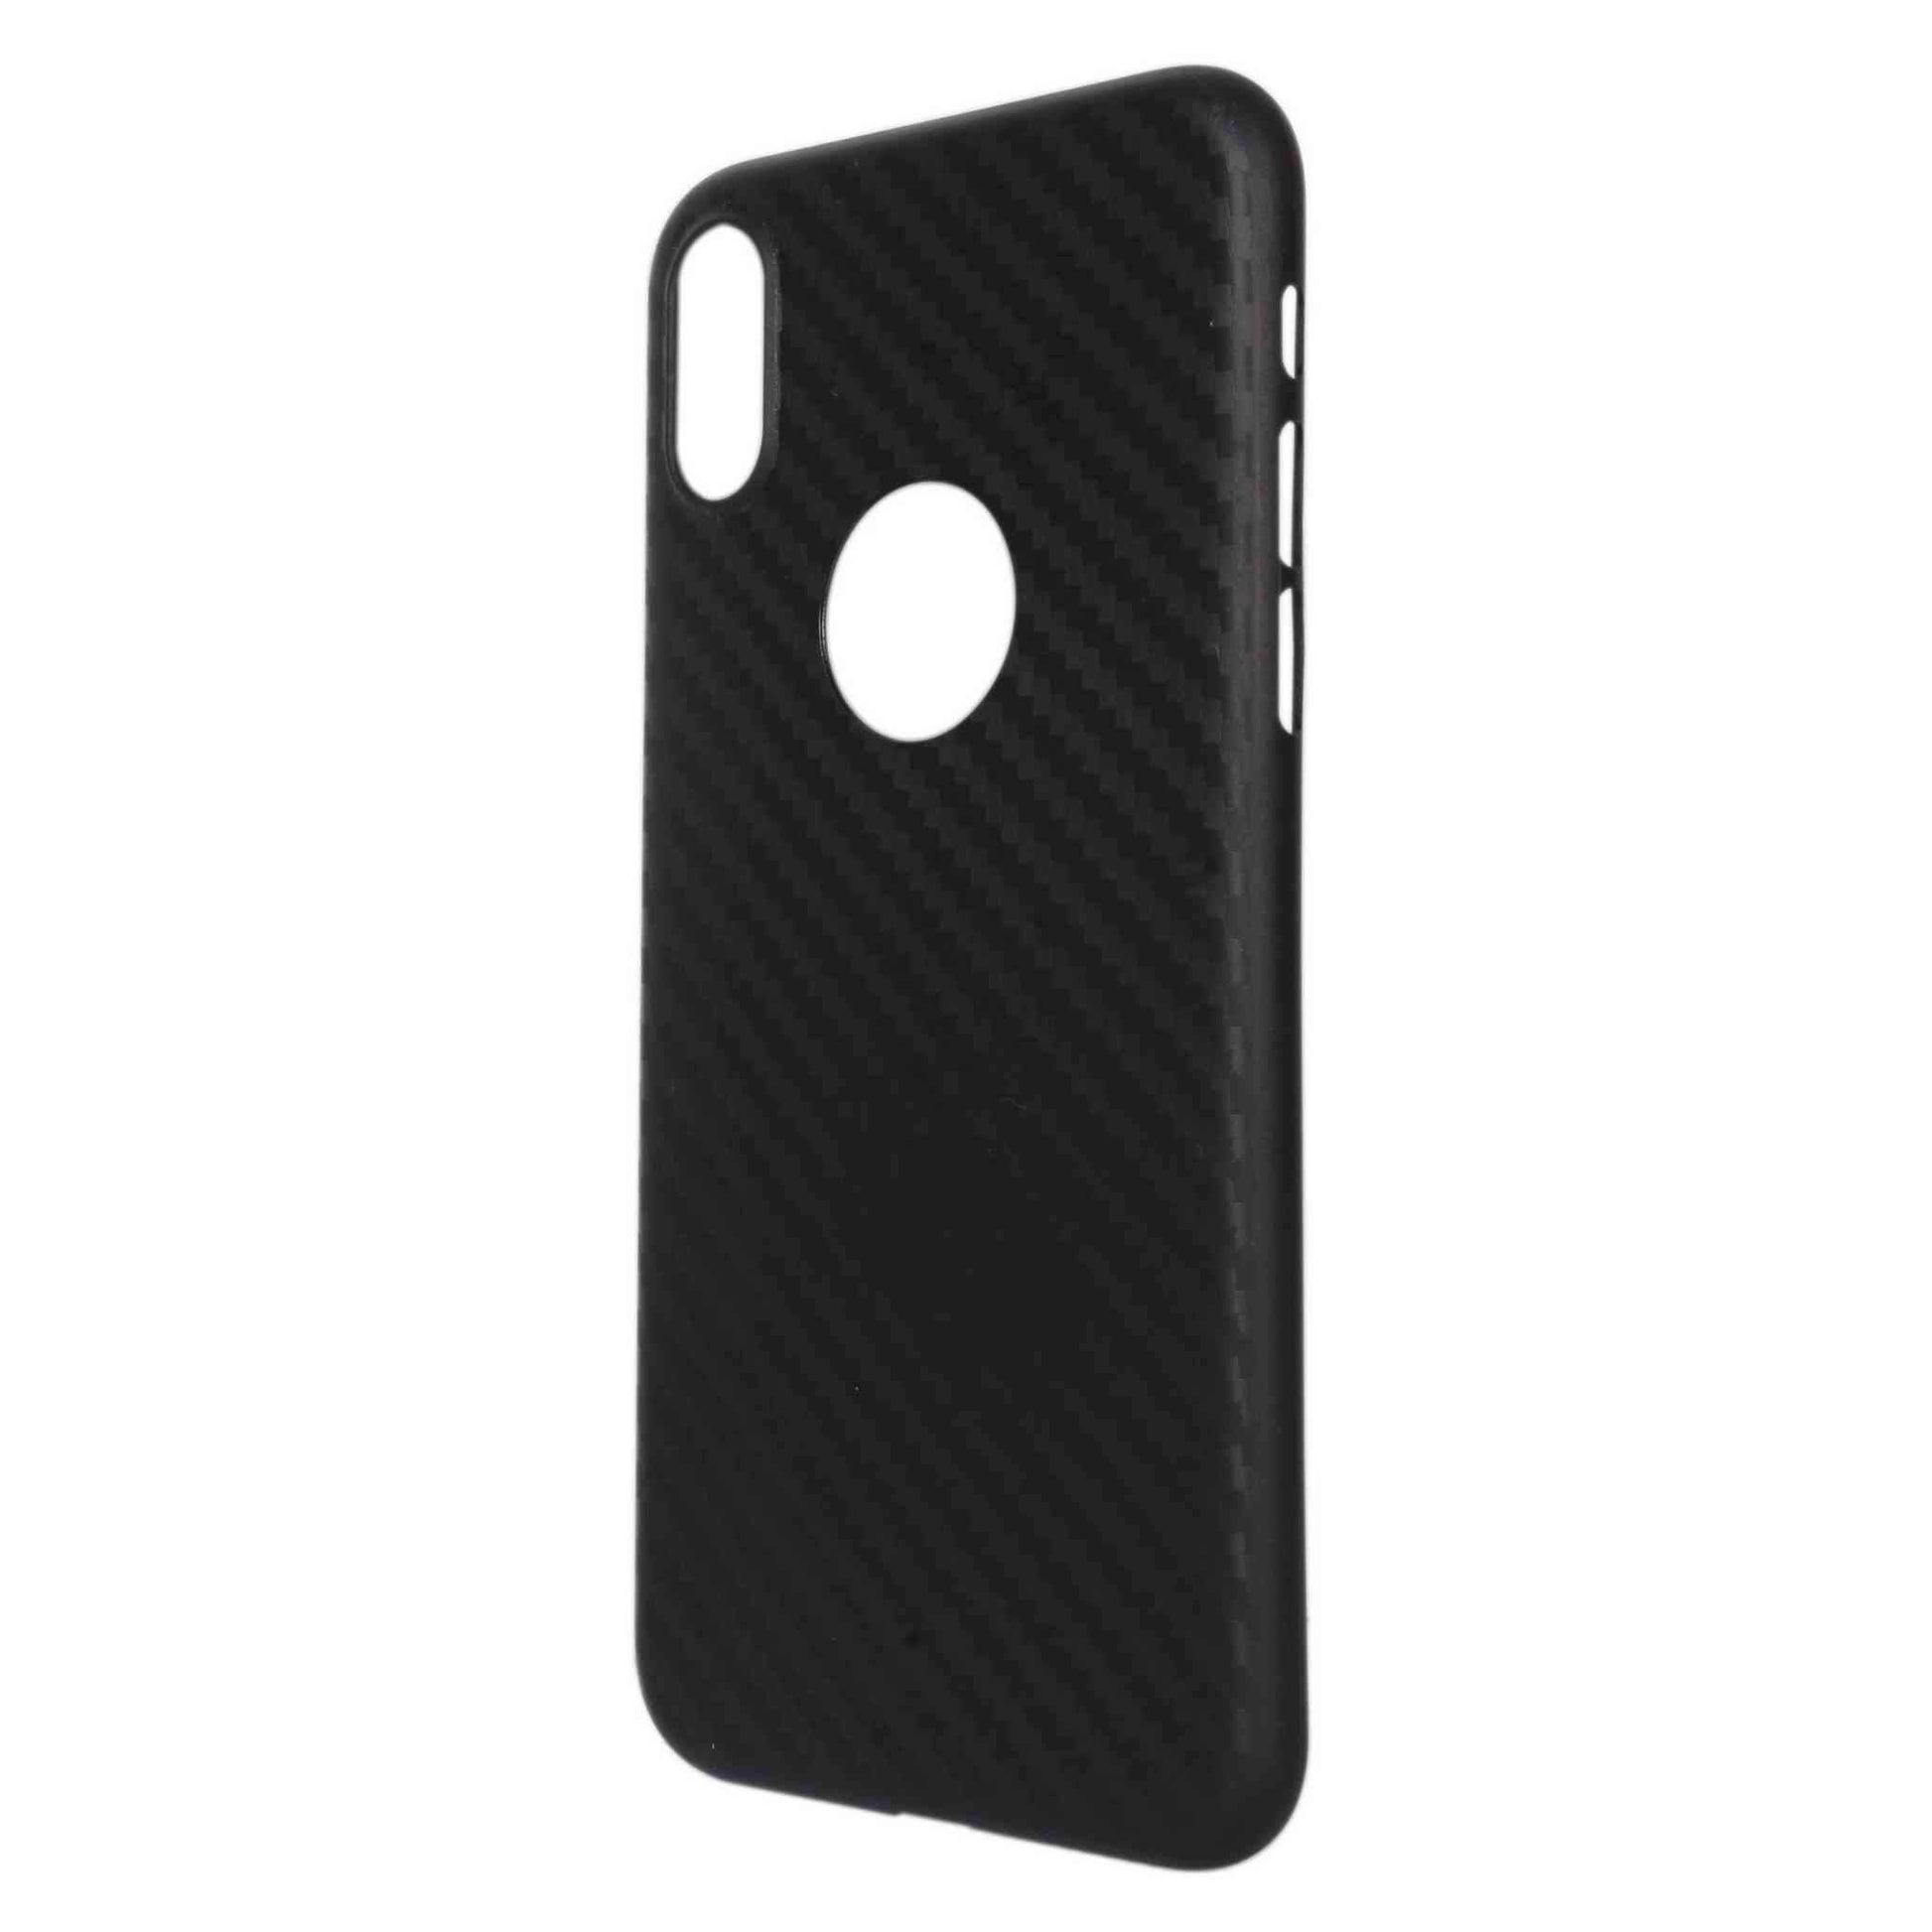 Indian Petals Polycarbonate 3D Pattern Protective Mobile Back Case Cover for Apple iPhone X, Black - Indian Petals